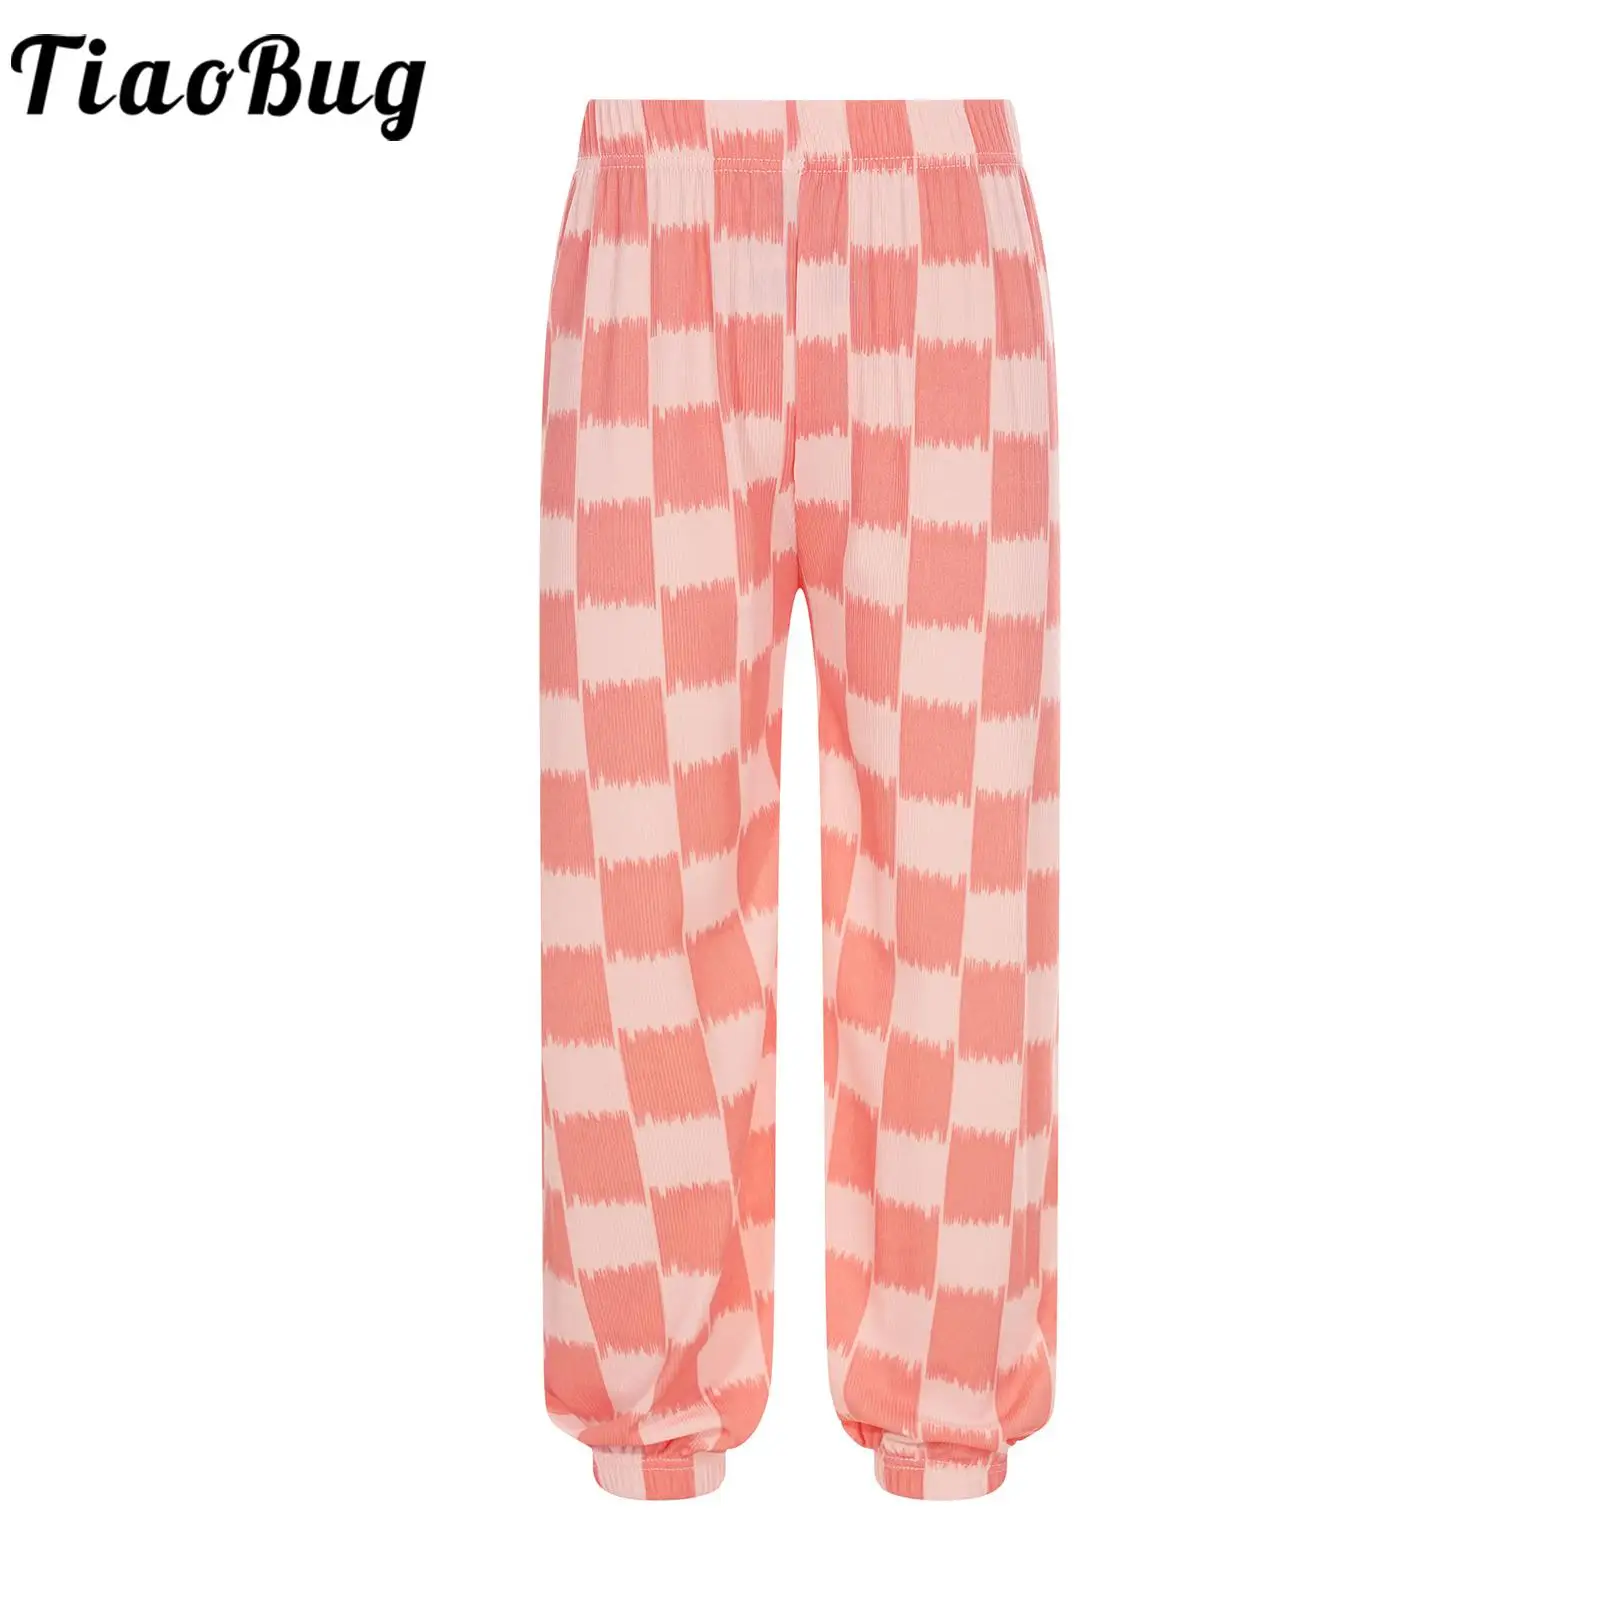 

Unisex Kids Boys Girls Stylish Contrast Color Plaid Sports Pants Casual Elastic Waistband Bloomers Trousers Homewear Loungwear